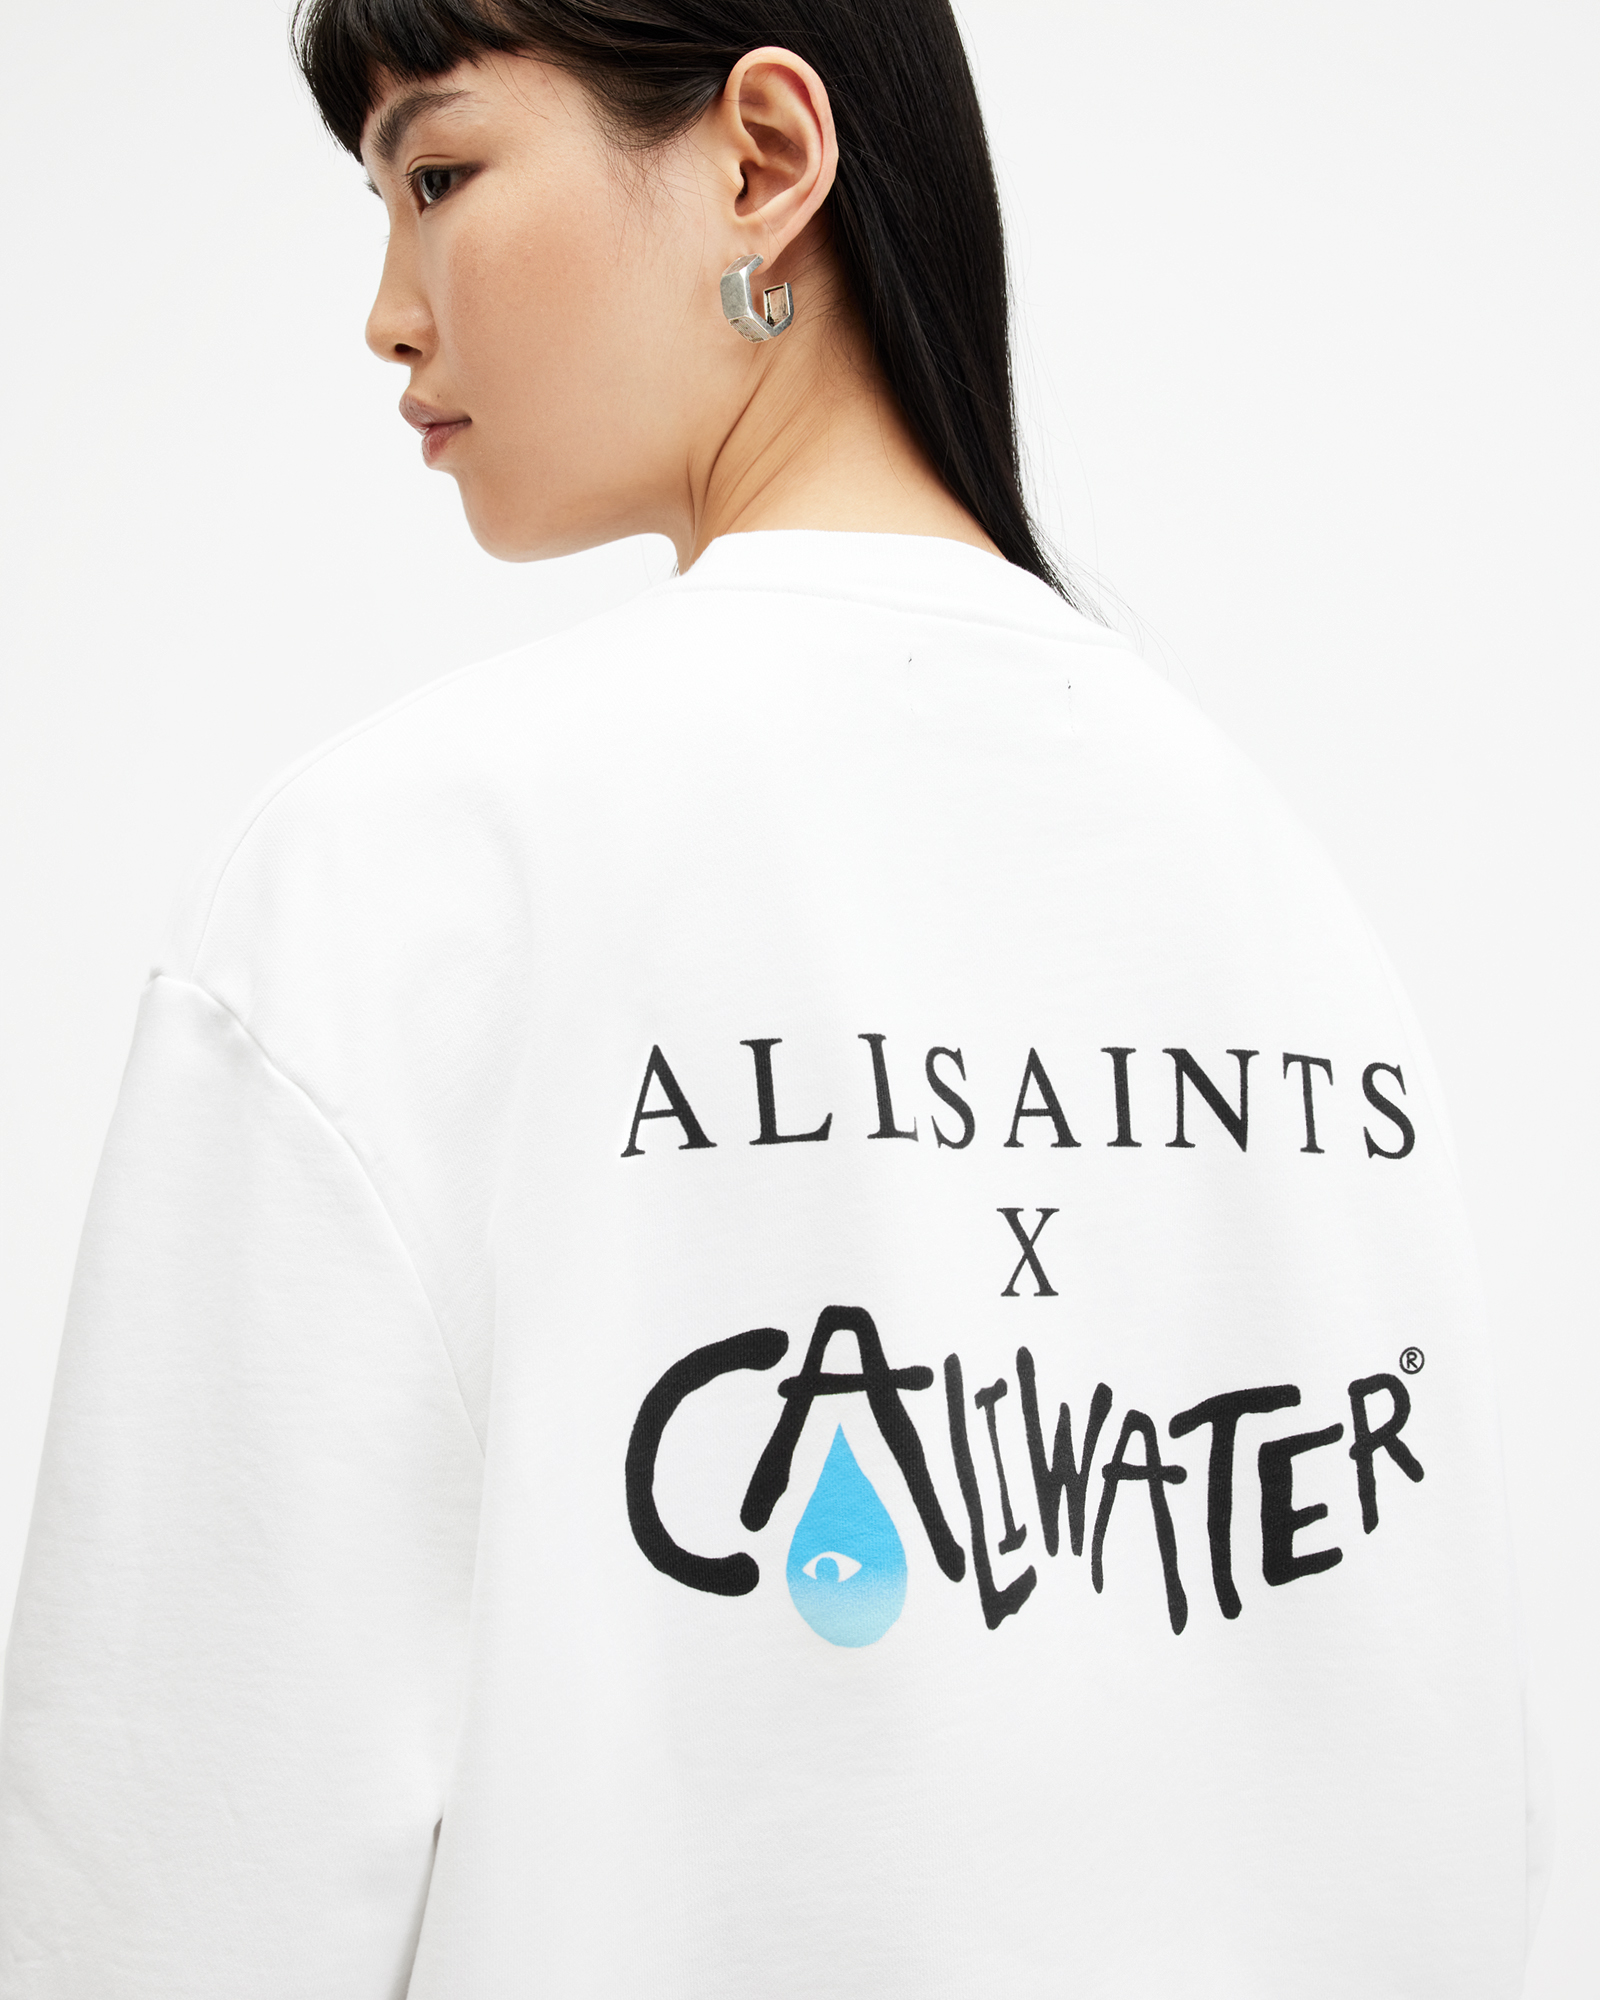 AllSaints Caliwater Relaxed Fit Sweatshirt